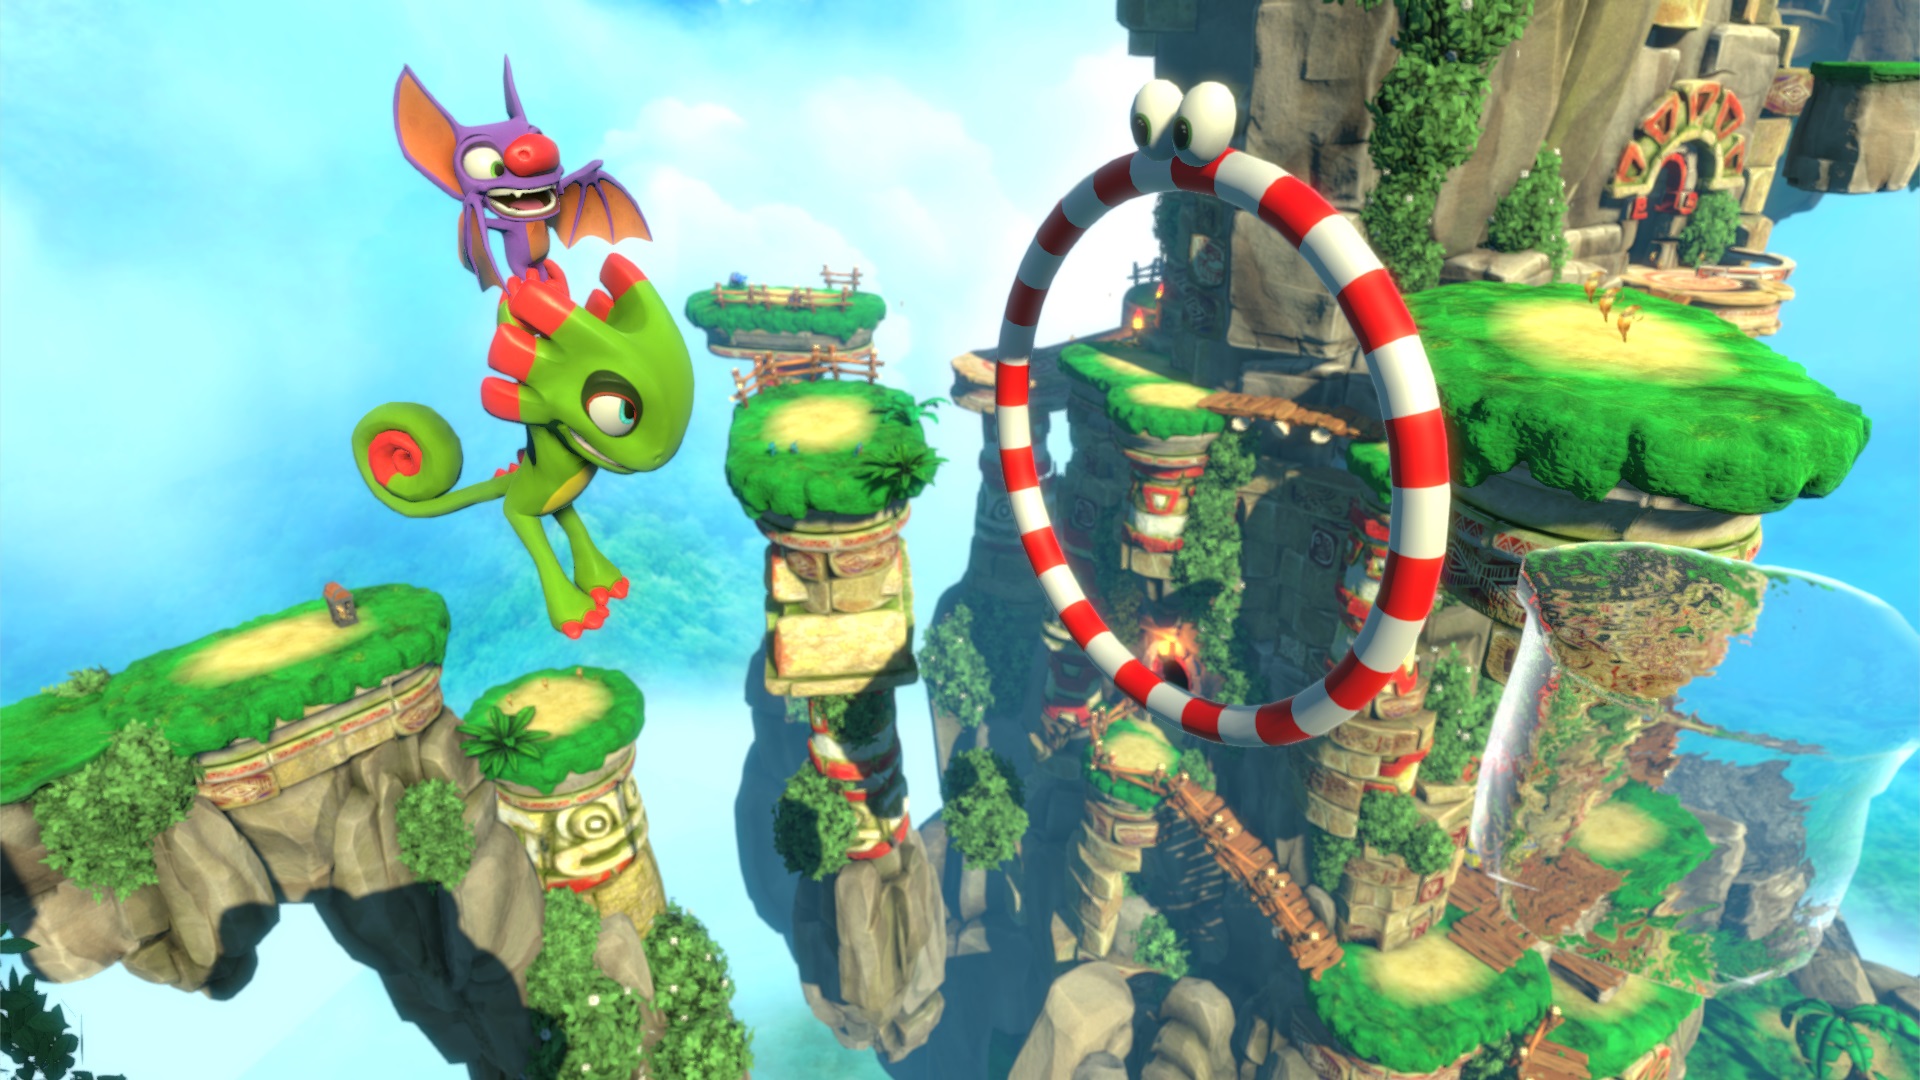  Yooka Laylee HQ Background Images